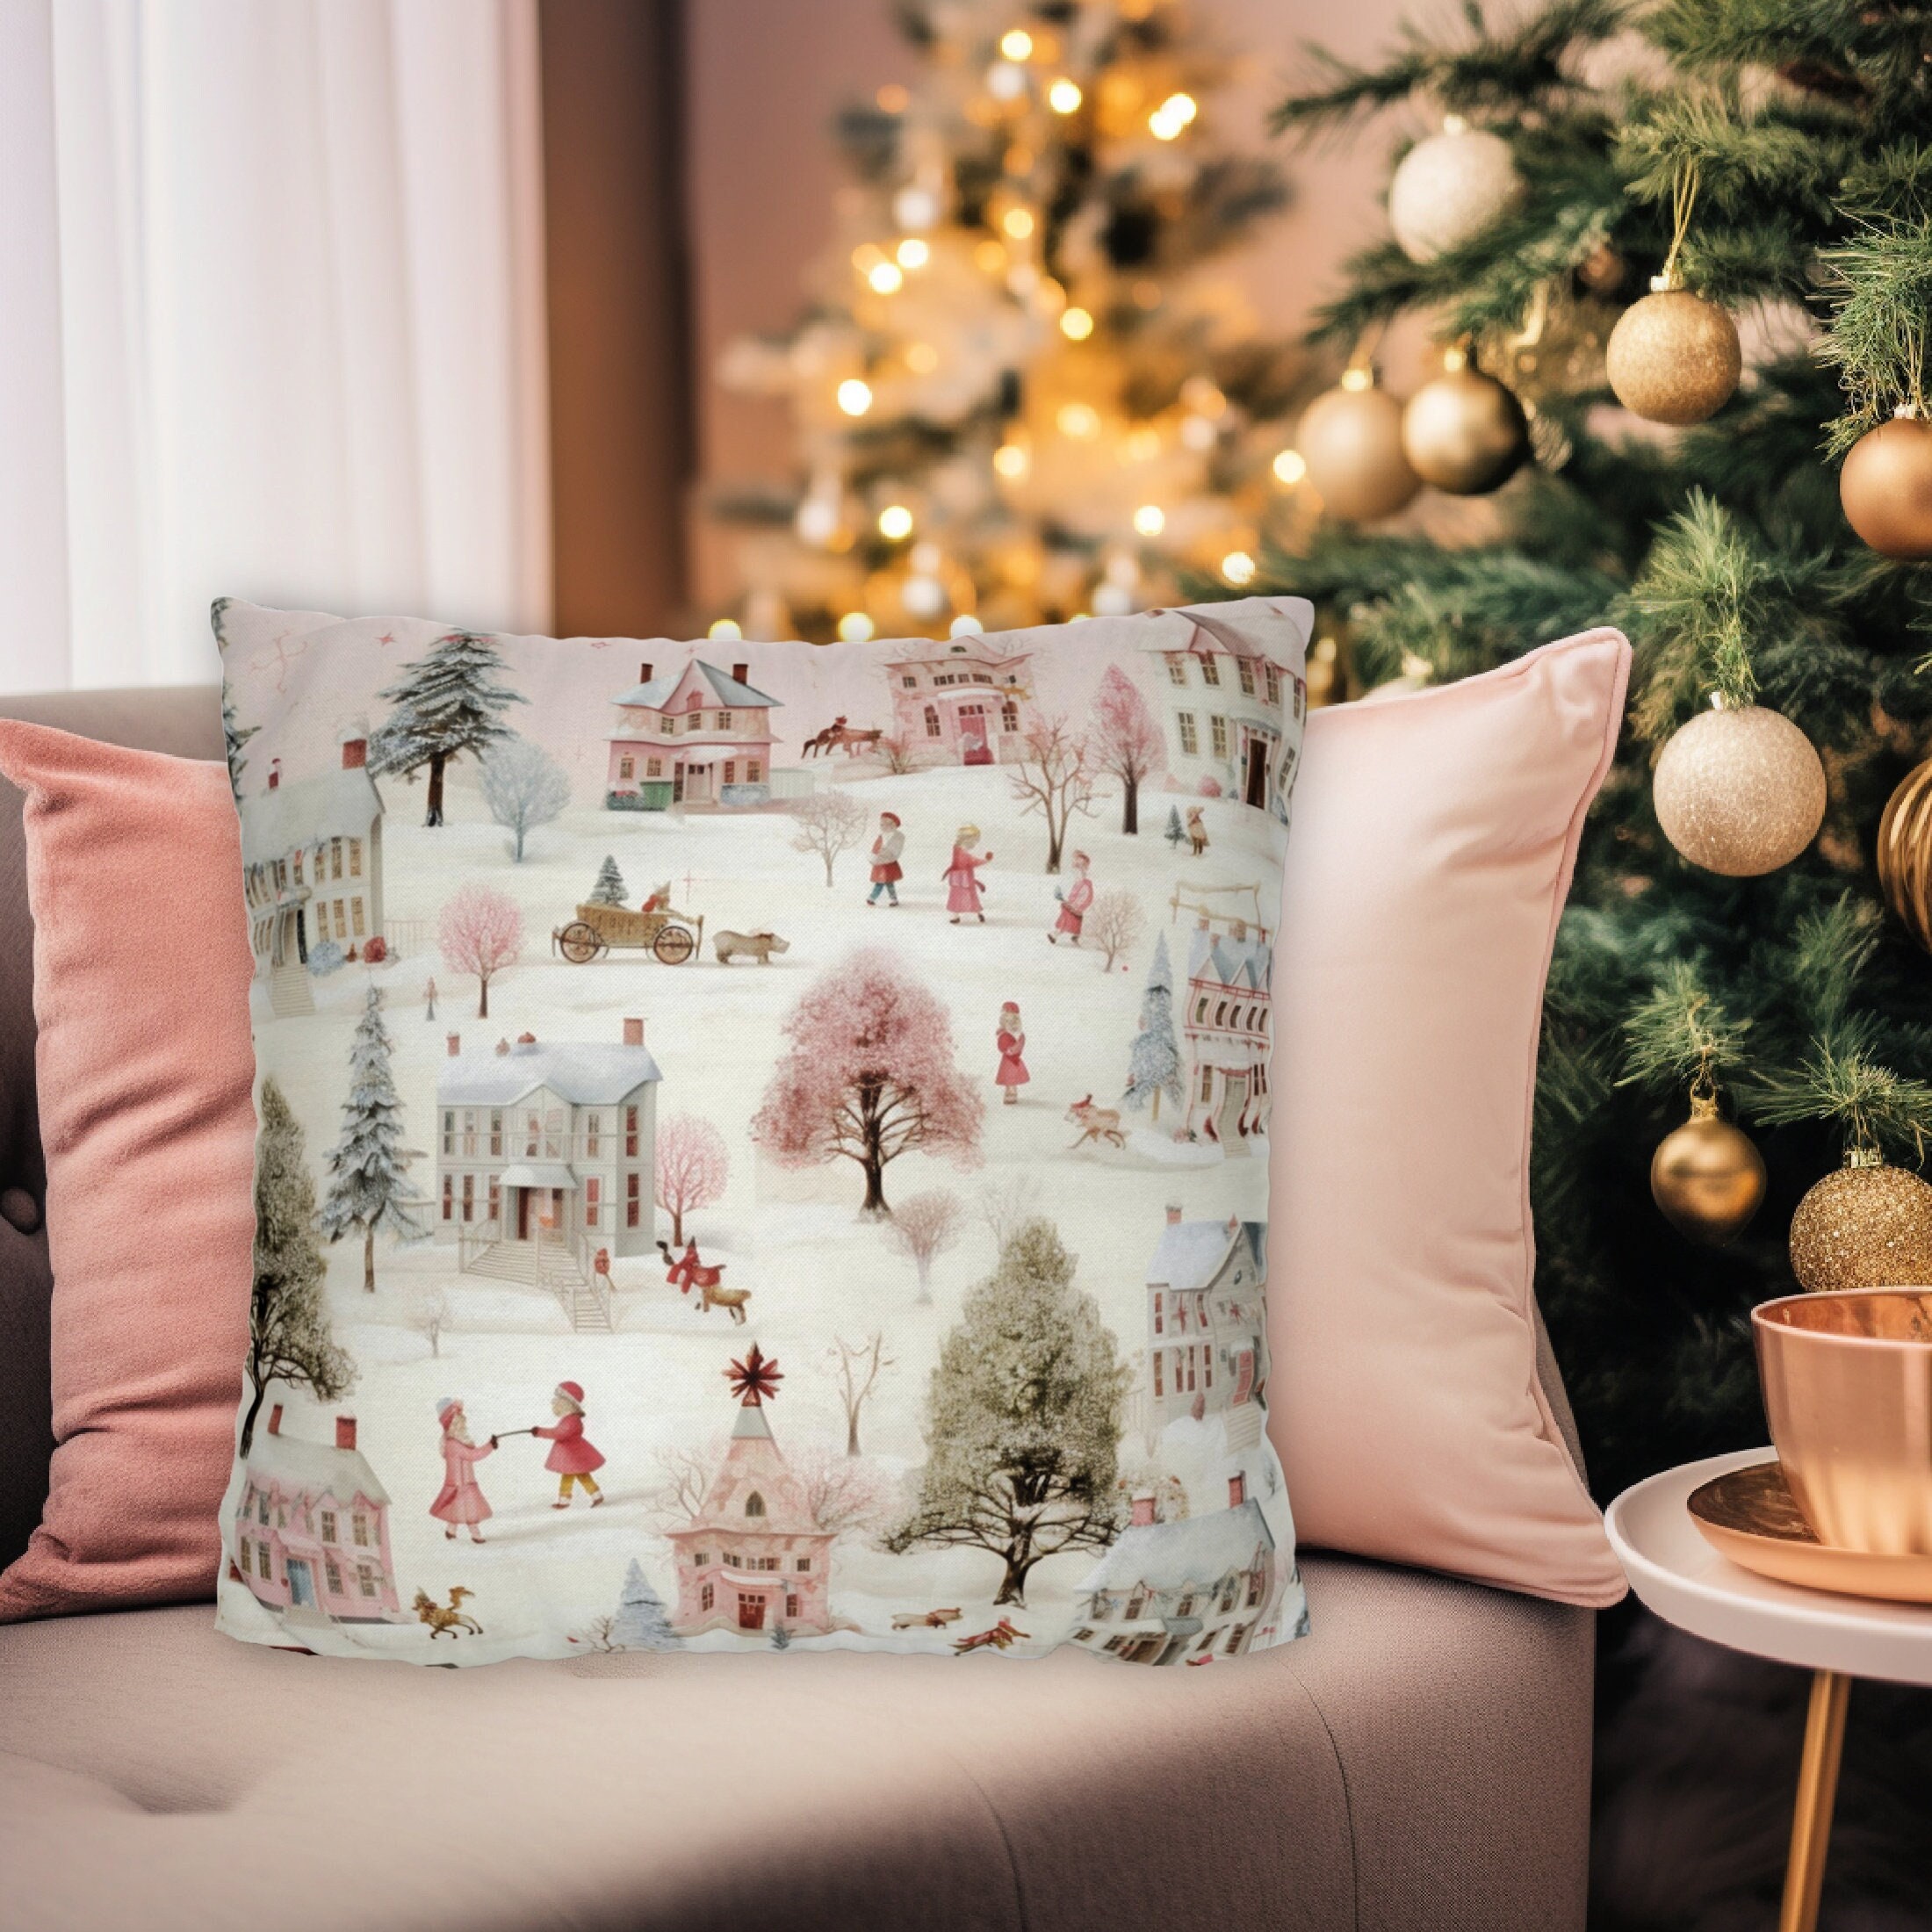 PASTEL CHRISTMAS PILLOW Pink Holiday Whimsical Vintage Village Throw Pillow  Cover in 4 Sizes, 14x14, 16x16, 18x18, 20x20 